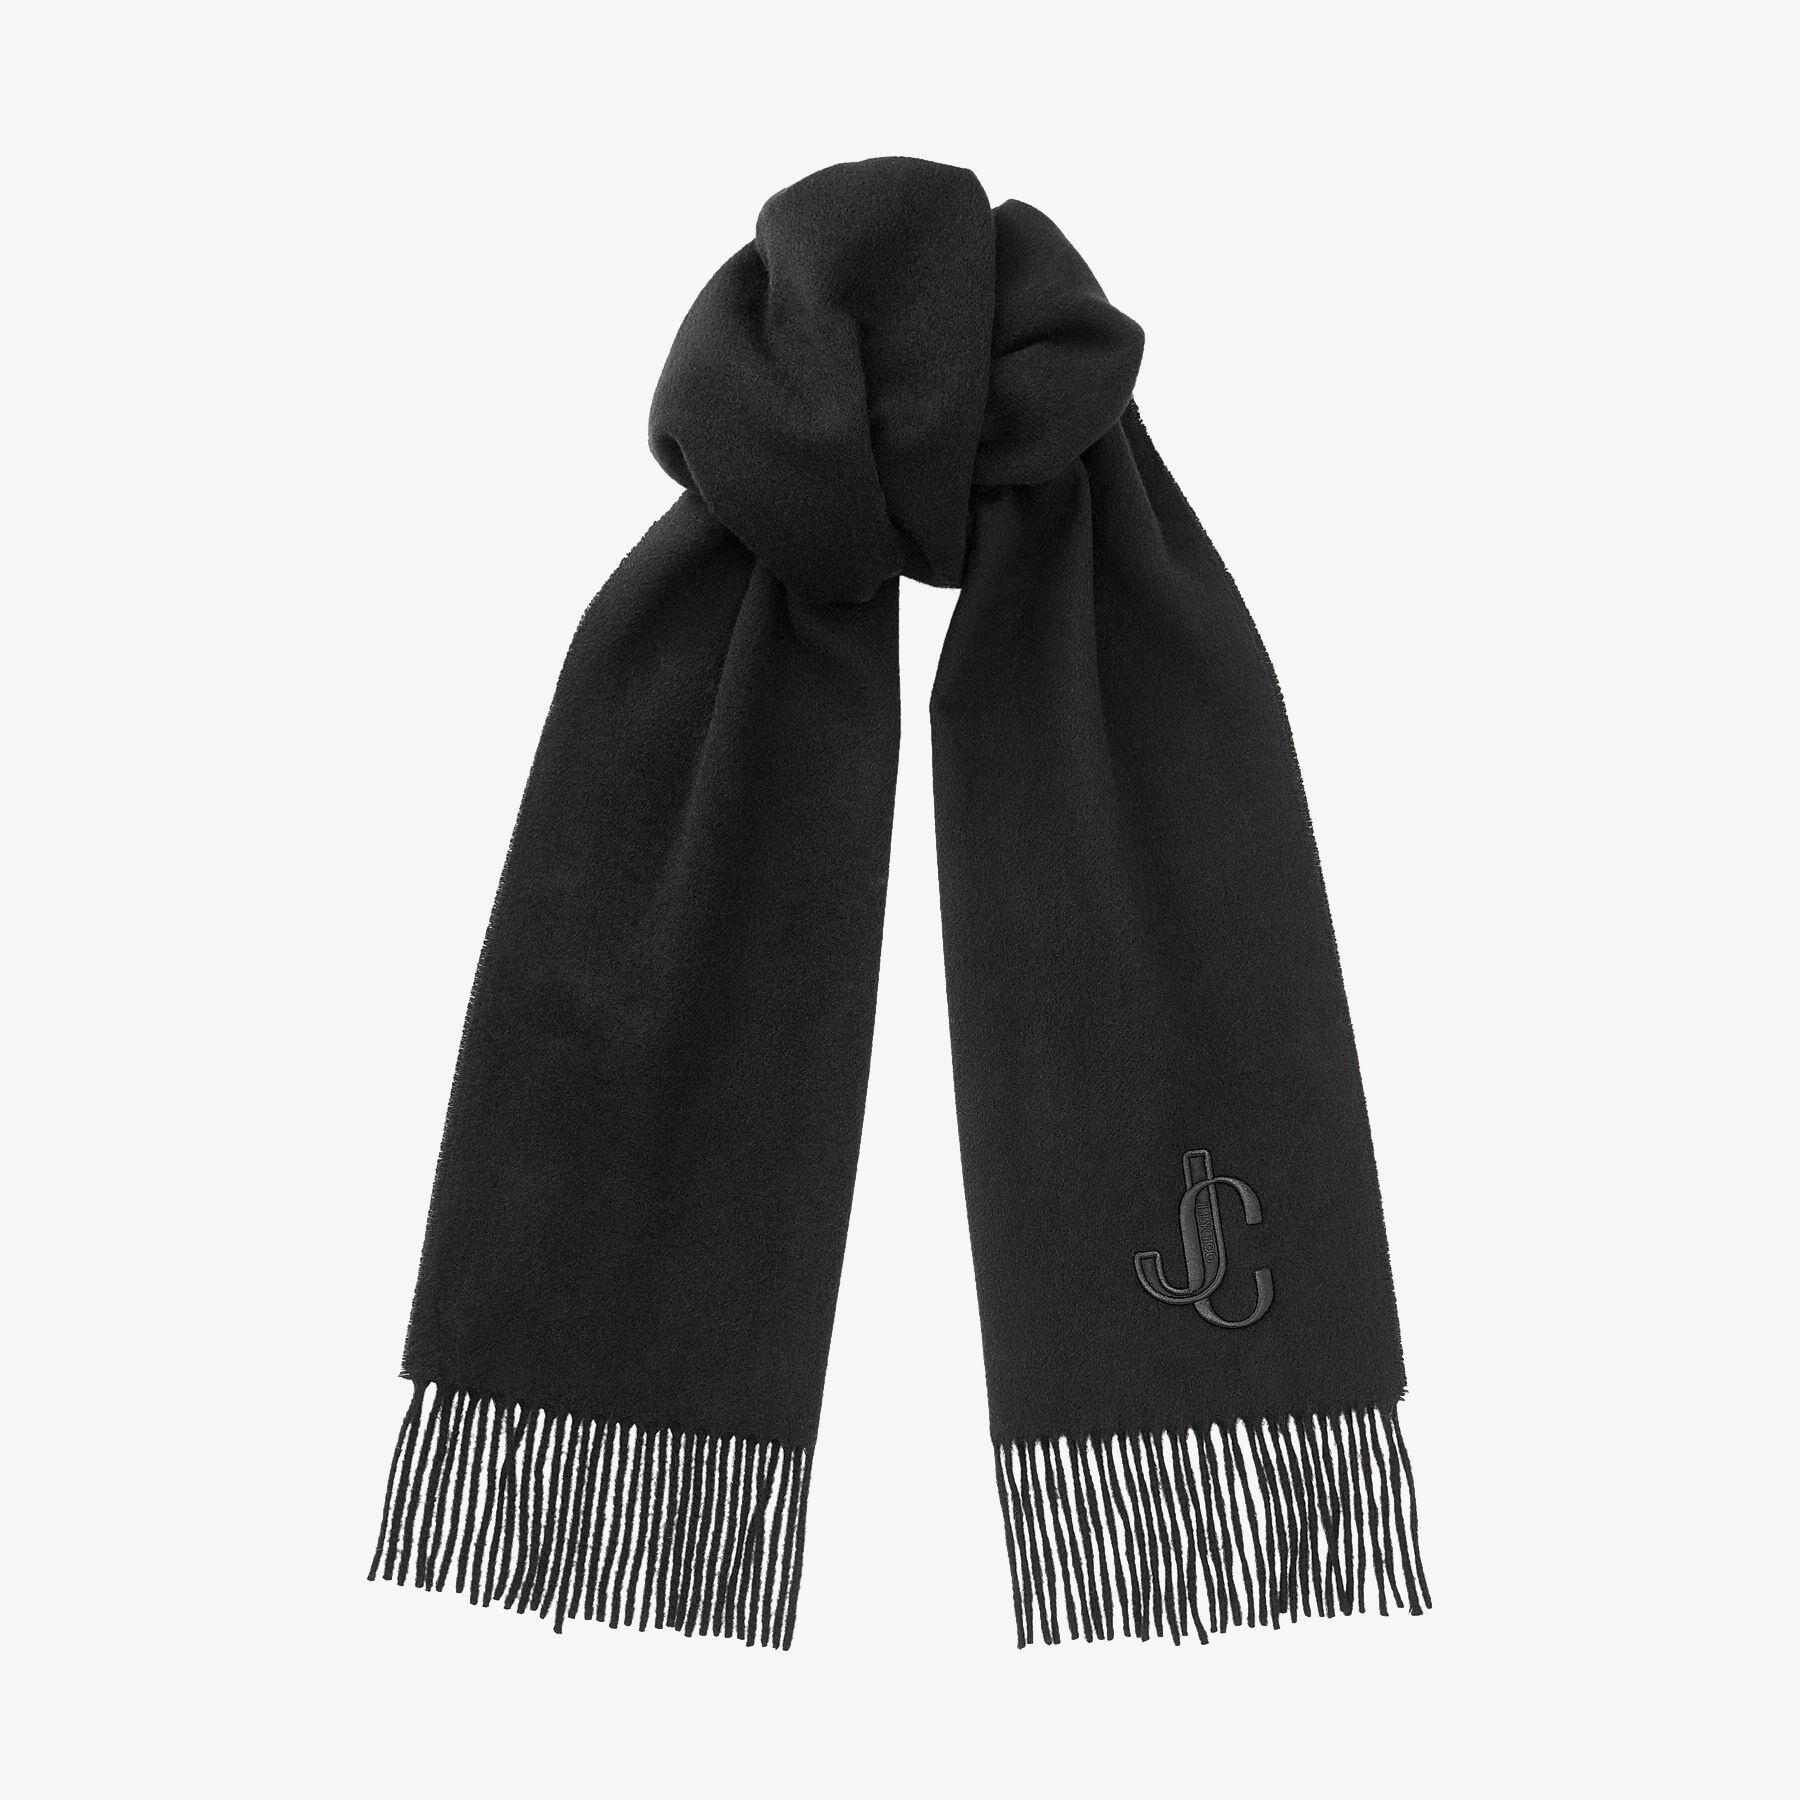 Charles
Black Recycled Cashmere Scarf with JC embroidery - 1